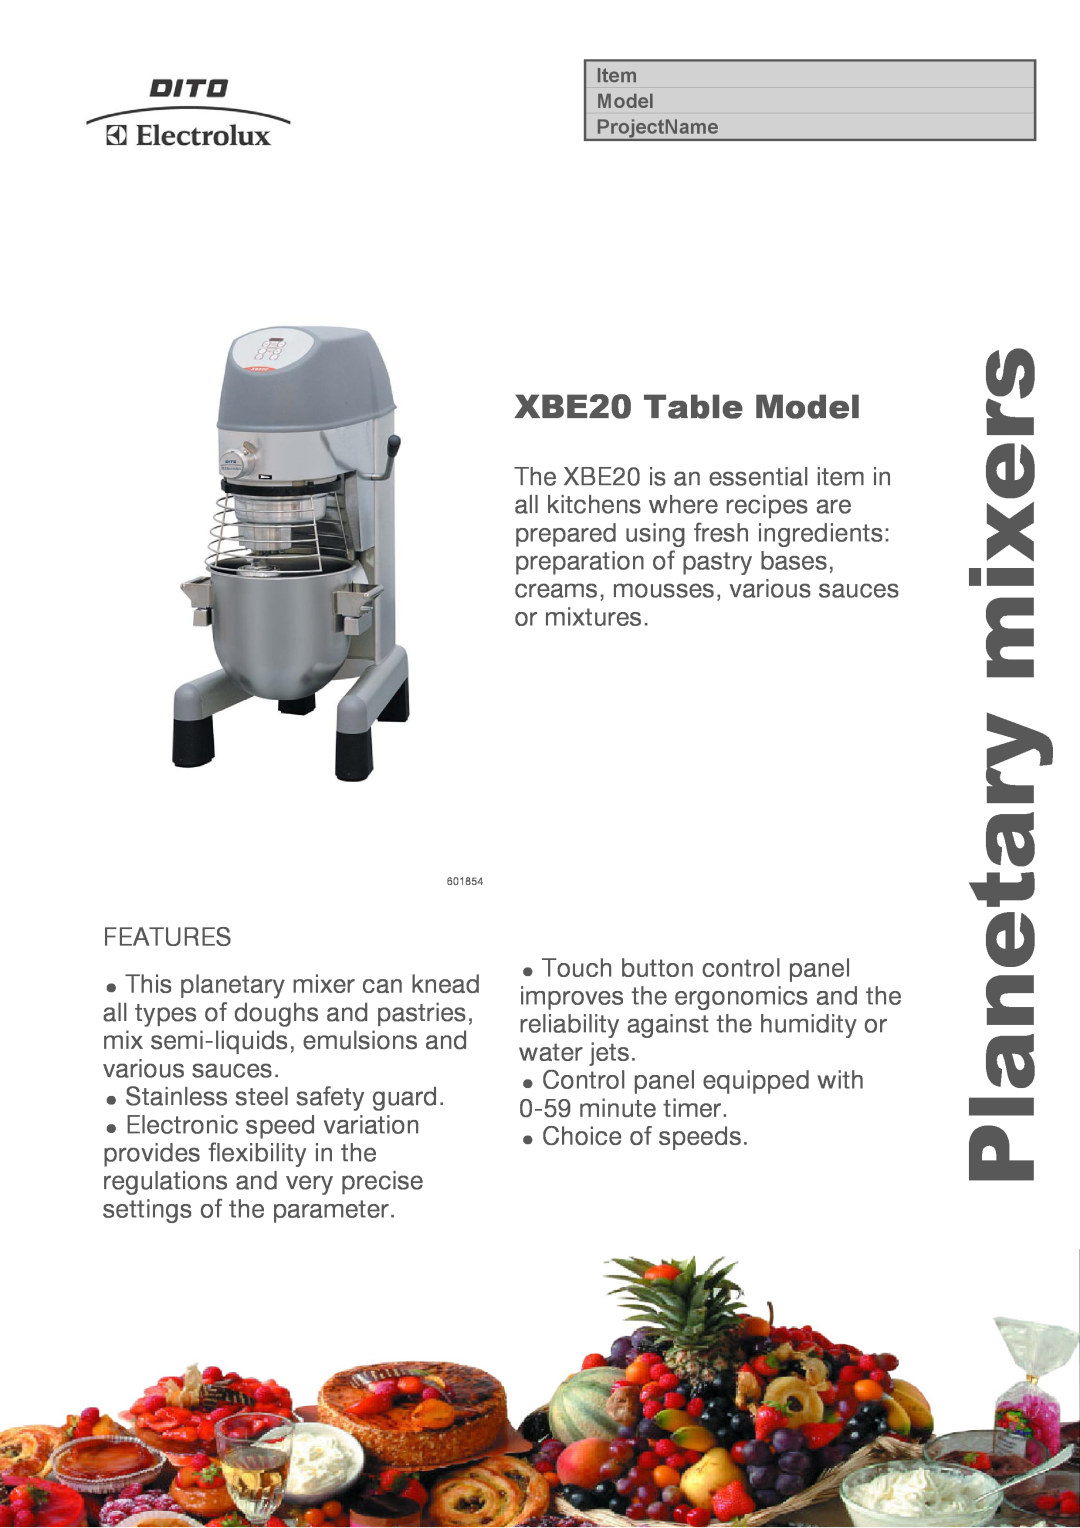 Electrolux XBEF20AST, XBEF20ST manual mixers, Planetary, XBE20 Table Model 